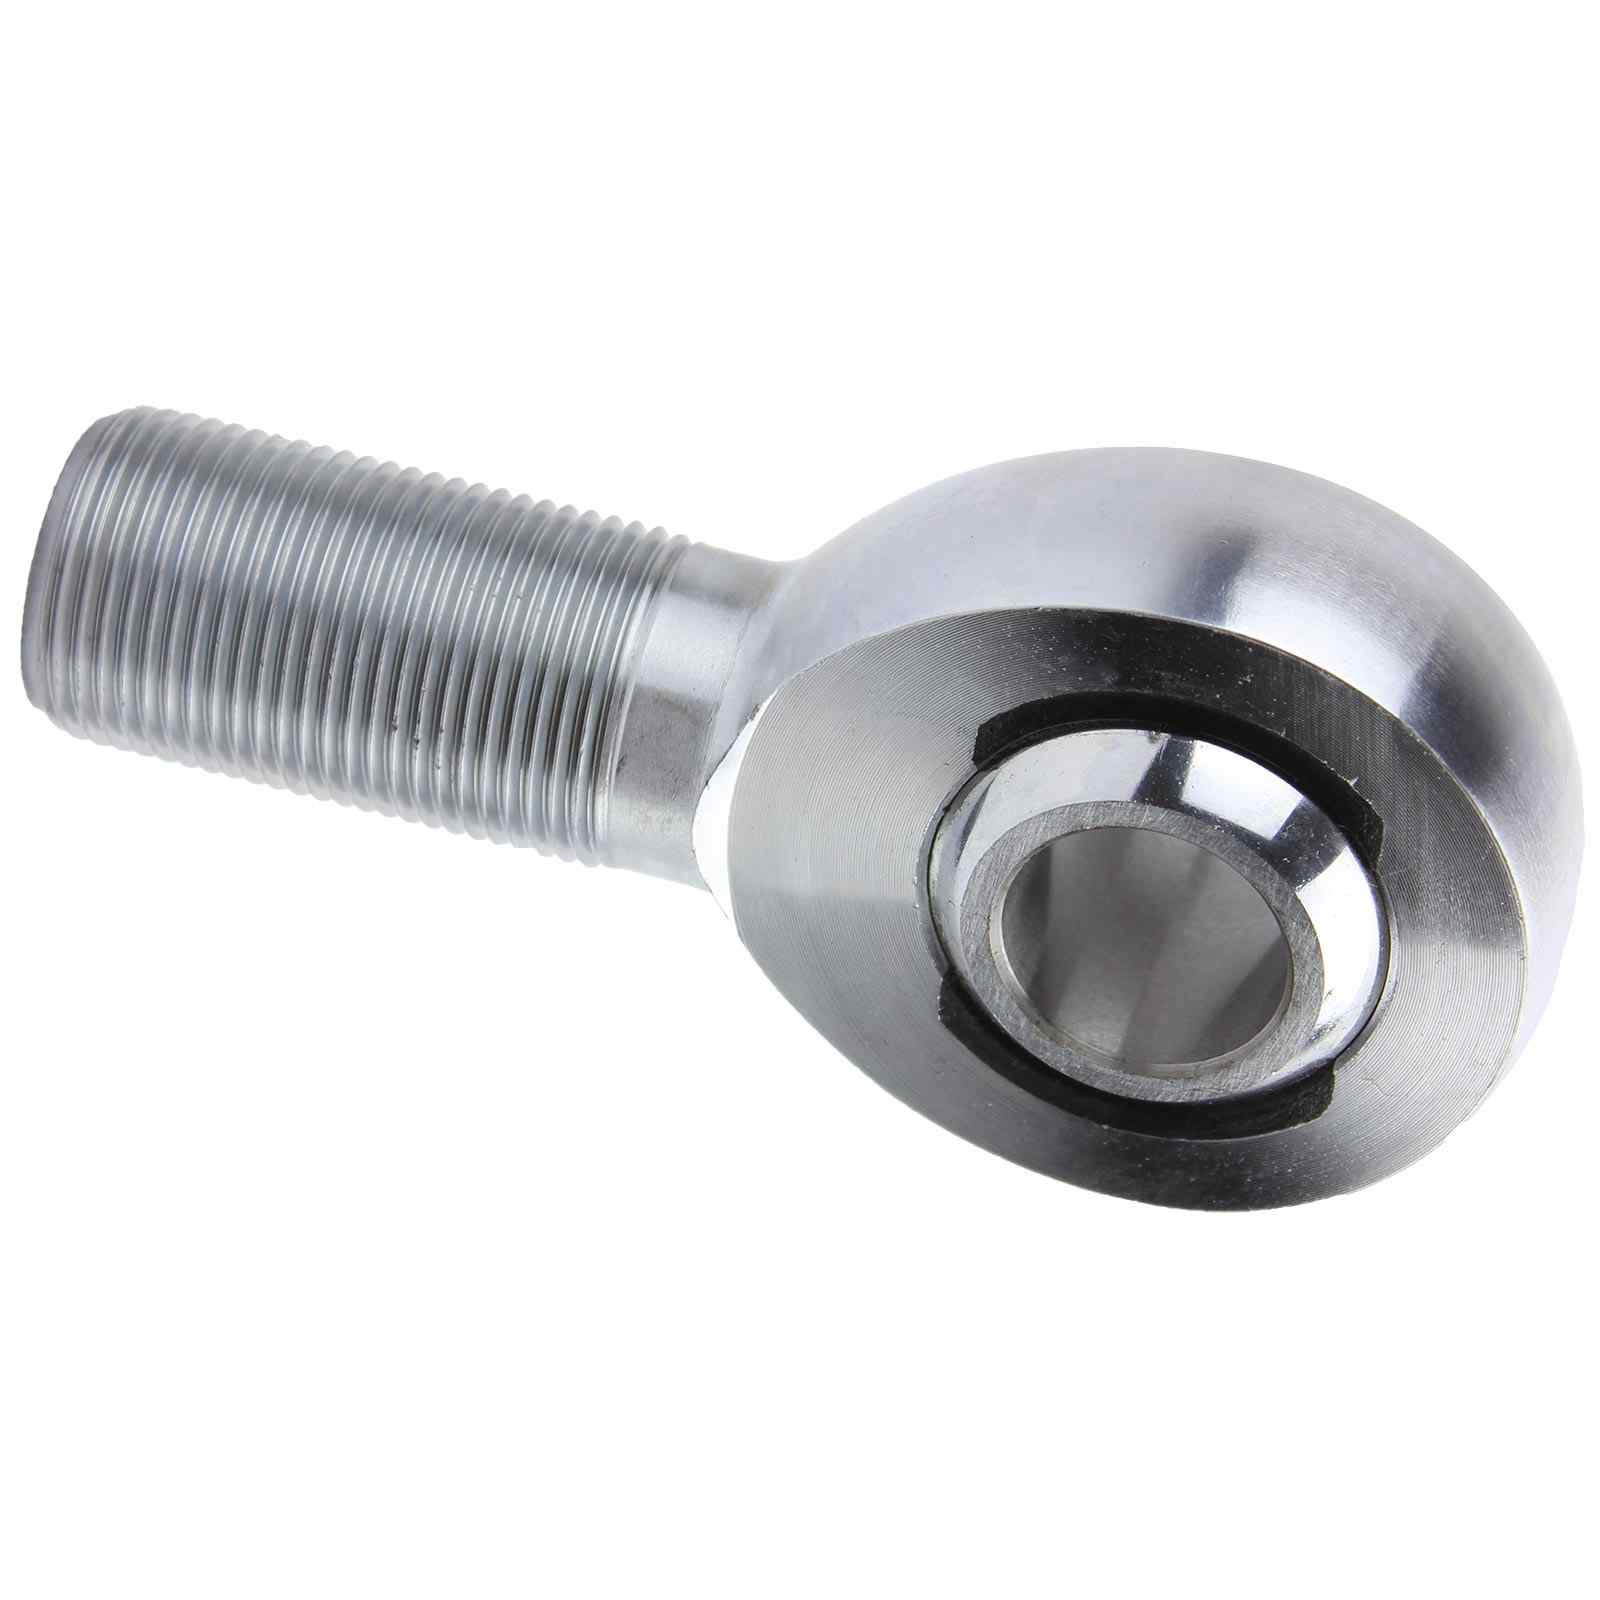 RuffStuff Specialties R1425 1 1/4 Inch Right Hand Threaded Hex Edge Tube Spherical Rod Heim Joint Adapter For 1 1/2 Inch ID Tube 